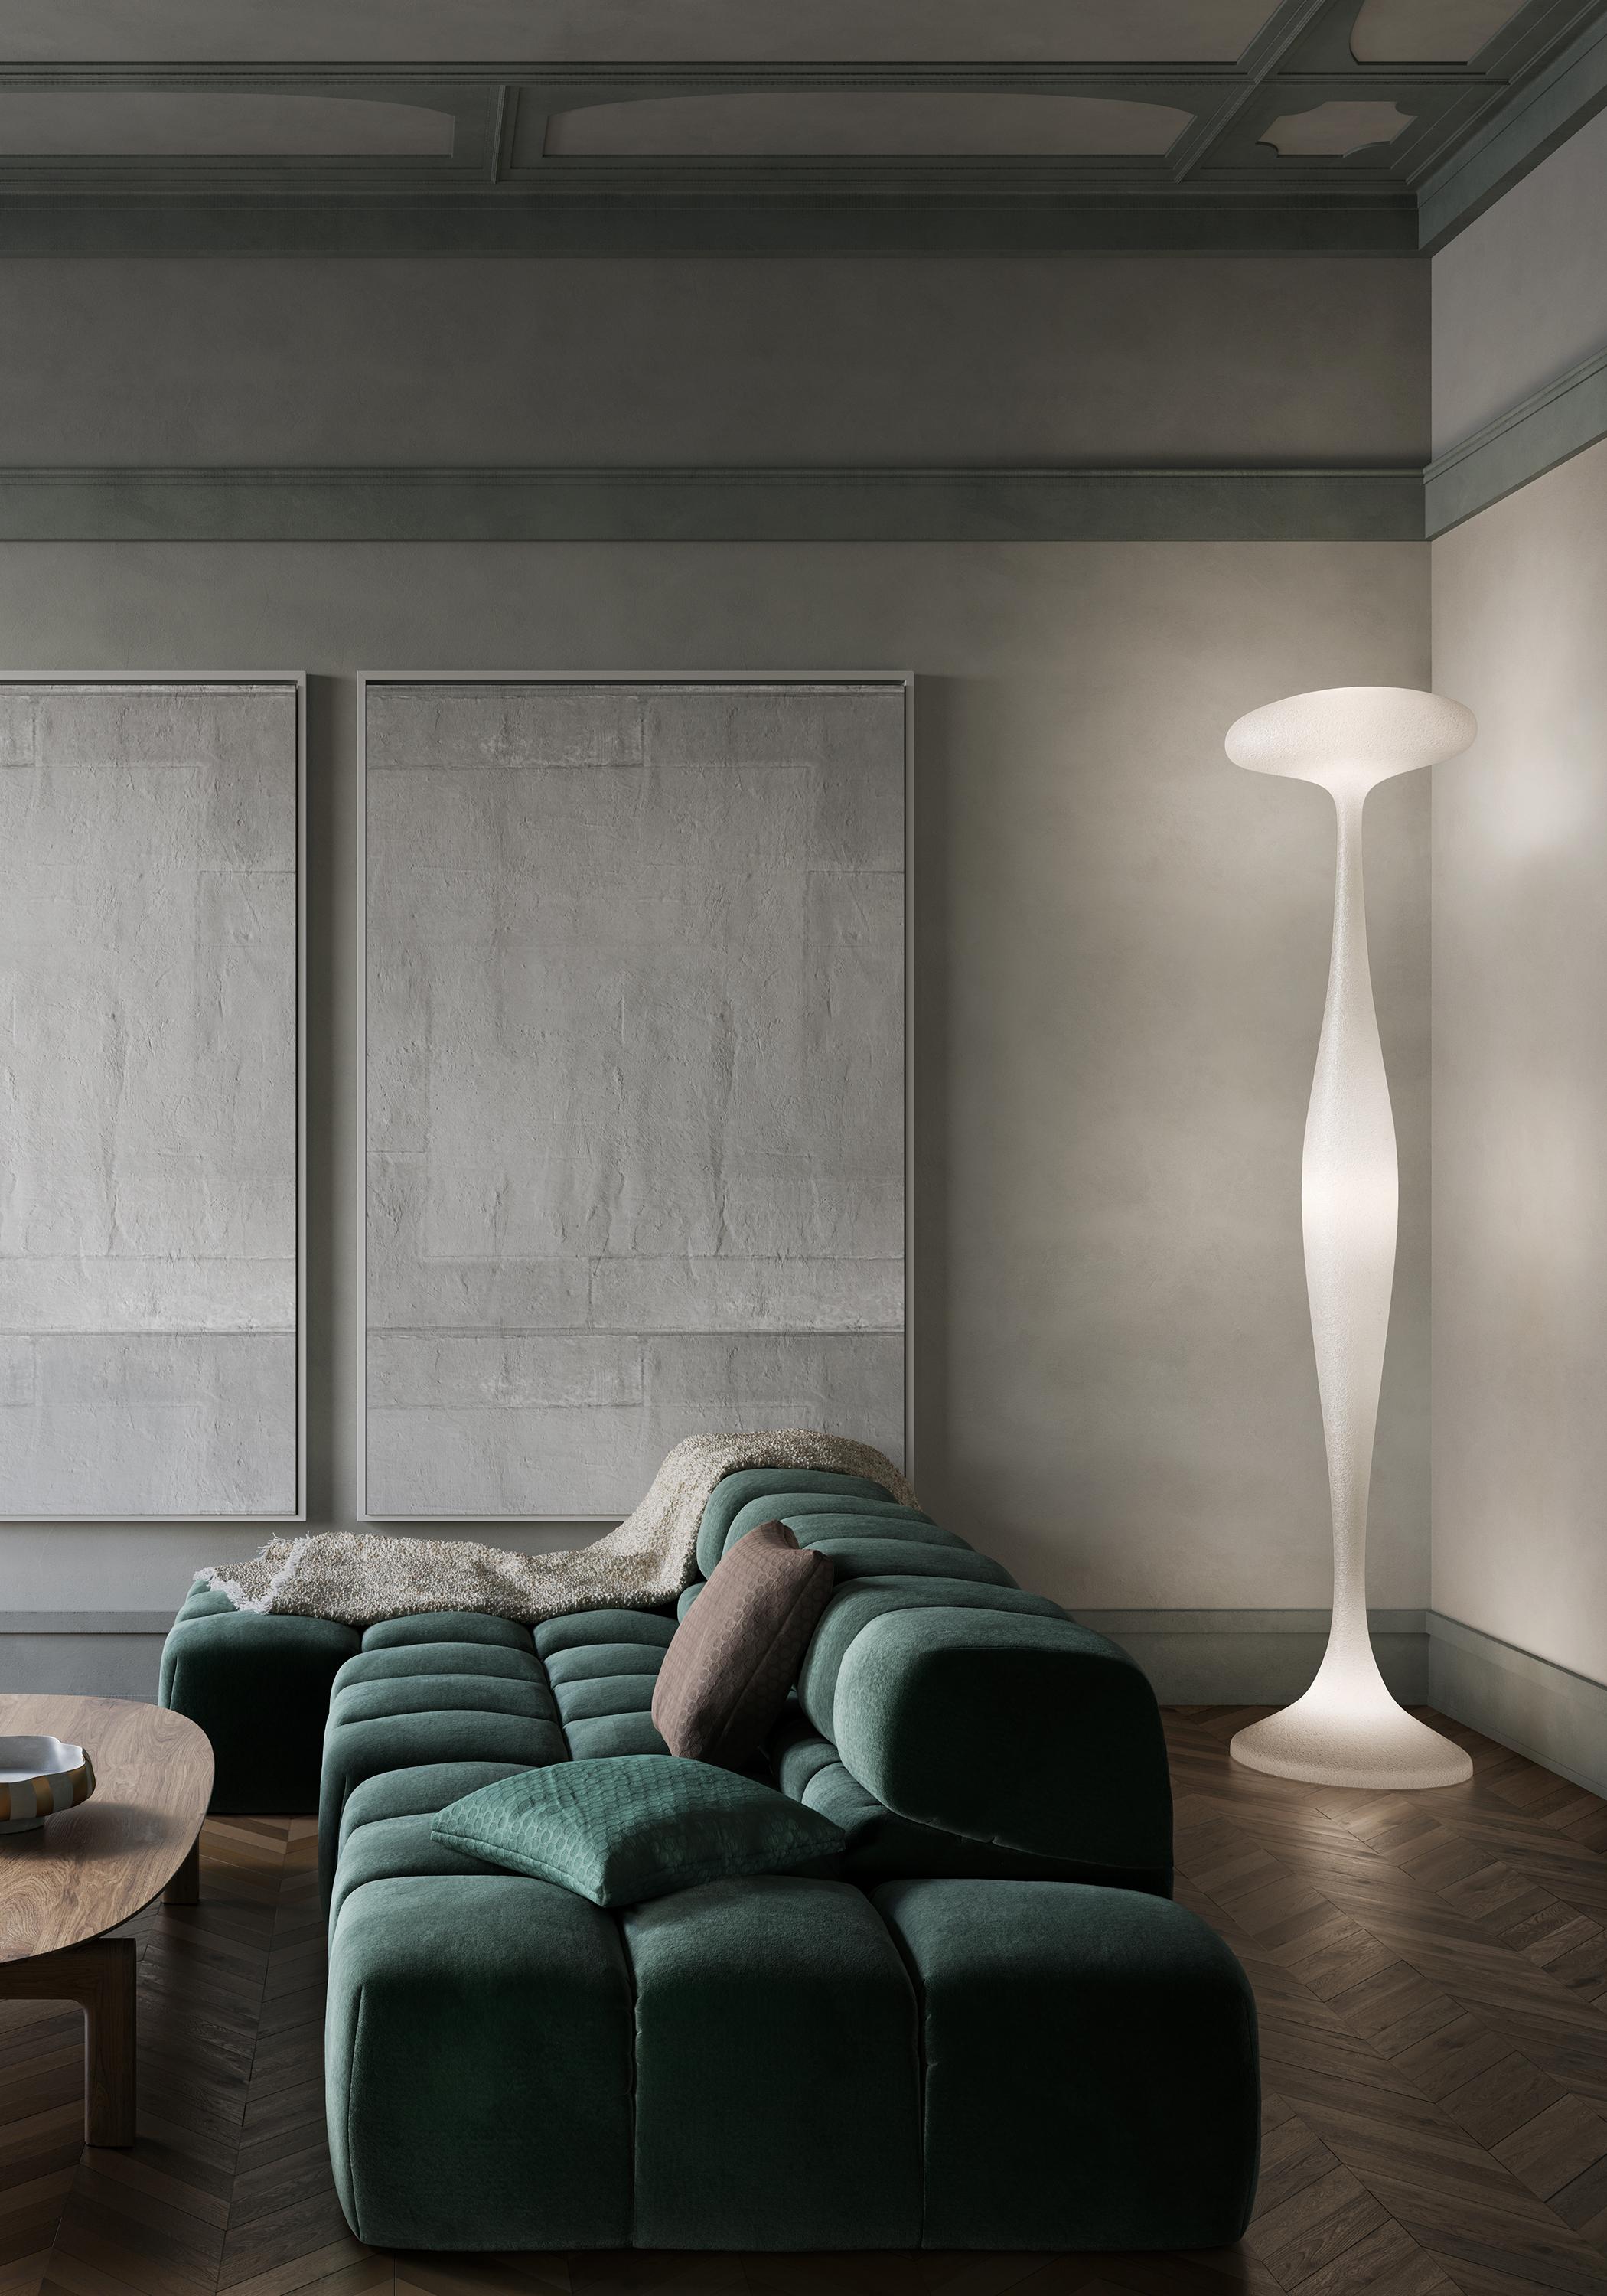 E.T.A. white finish

Craftsmanship and materials in a fascinating combination. A floor lamp in fibreglass shaped by hand. A sinuous object flooded with light that seems to arrive from faraway worlds to grace the space it occupies. Floor lamp.